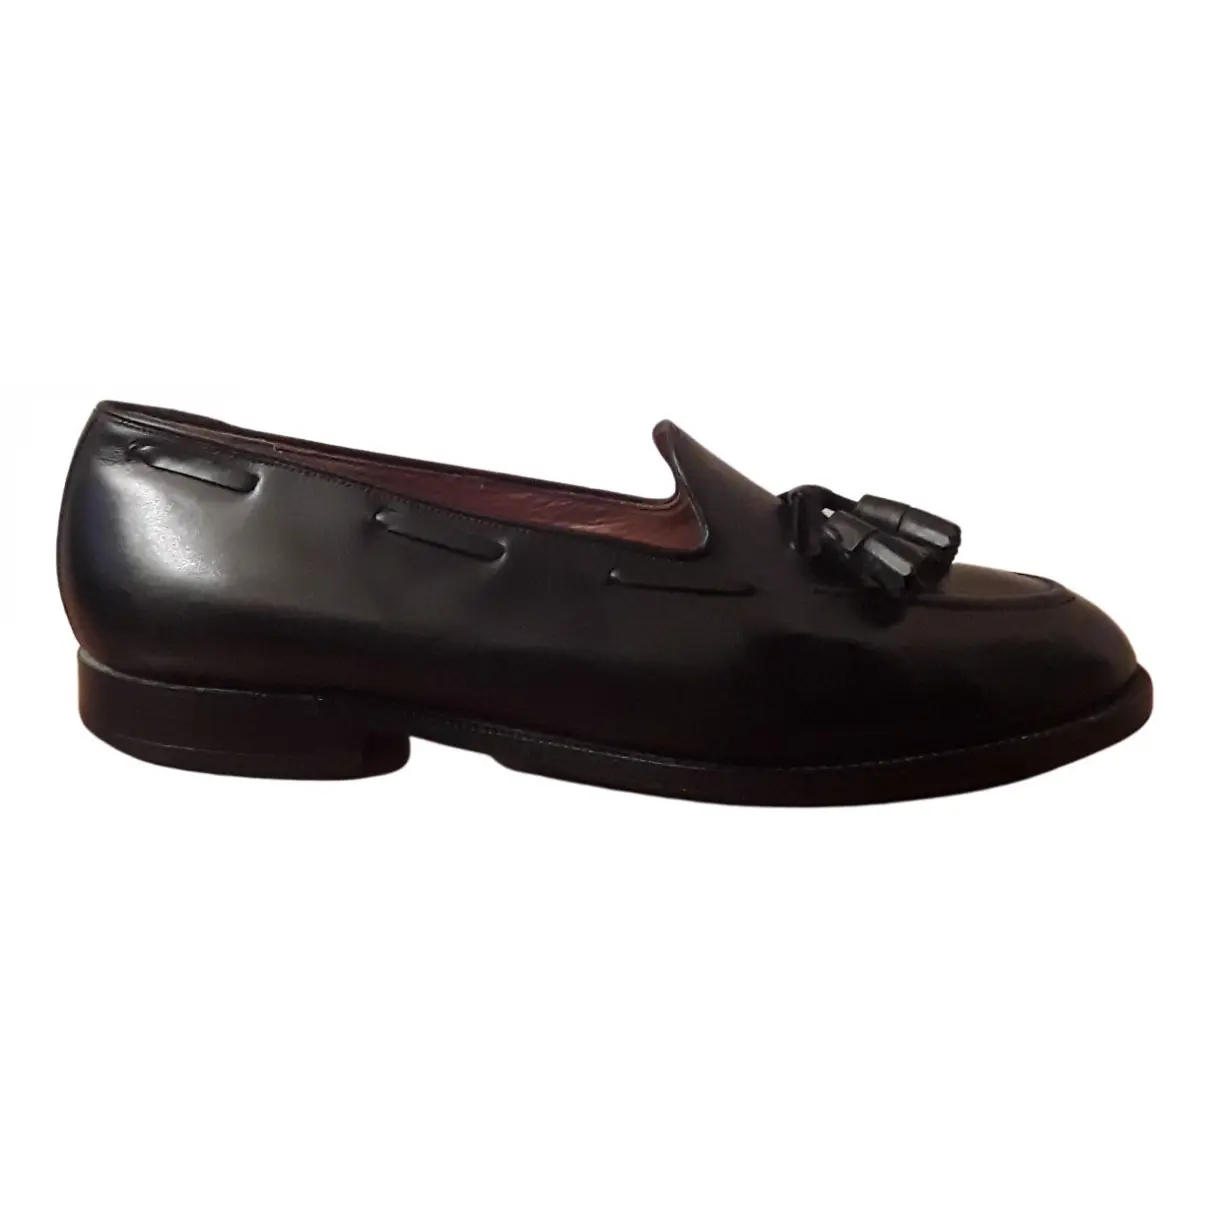 Leather flats Church's - Vintage